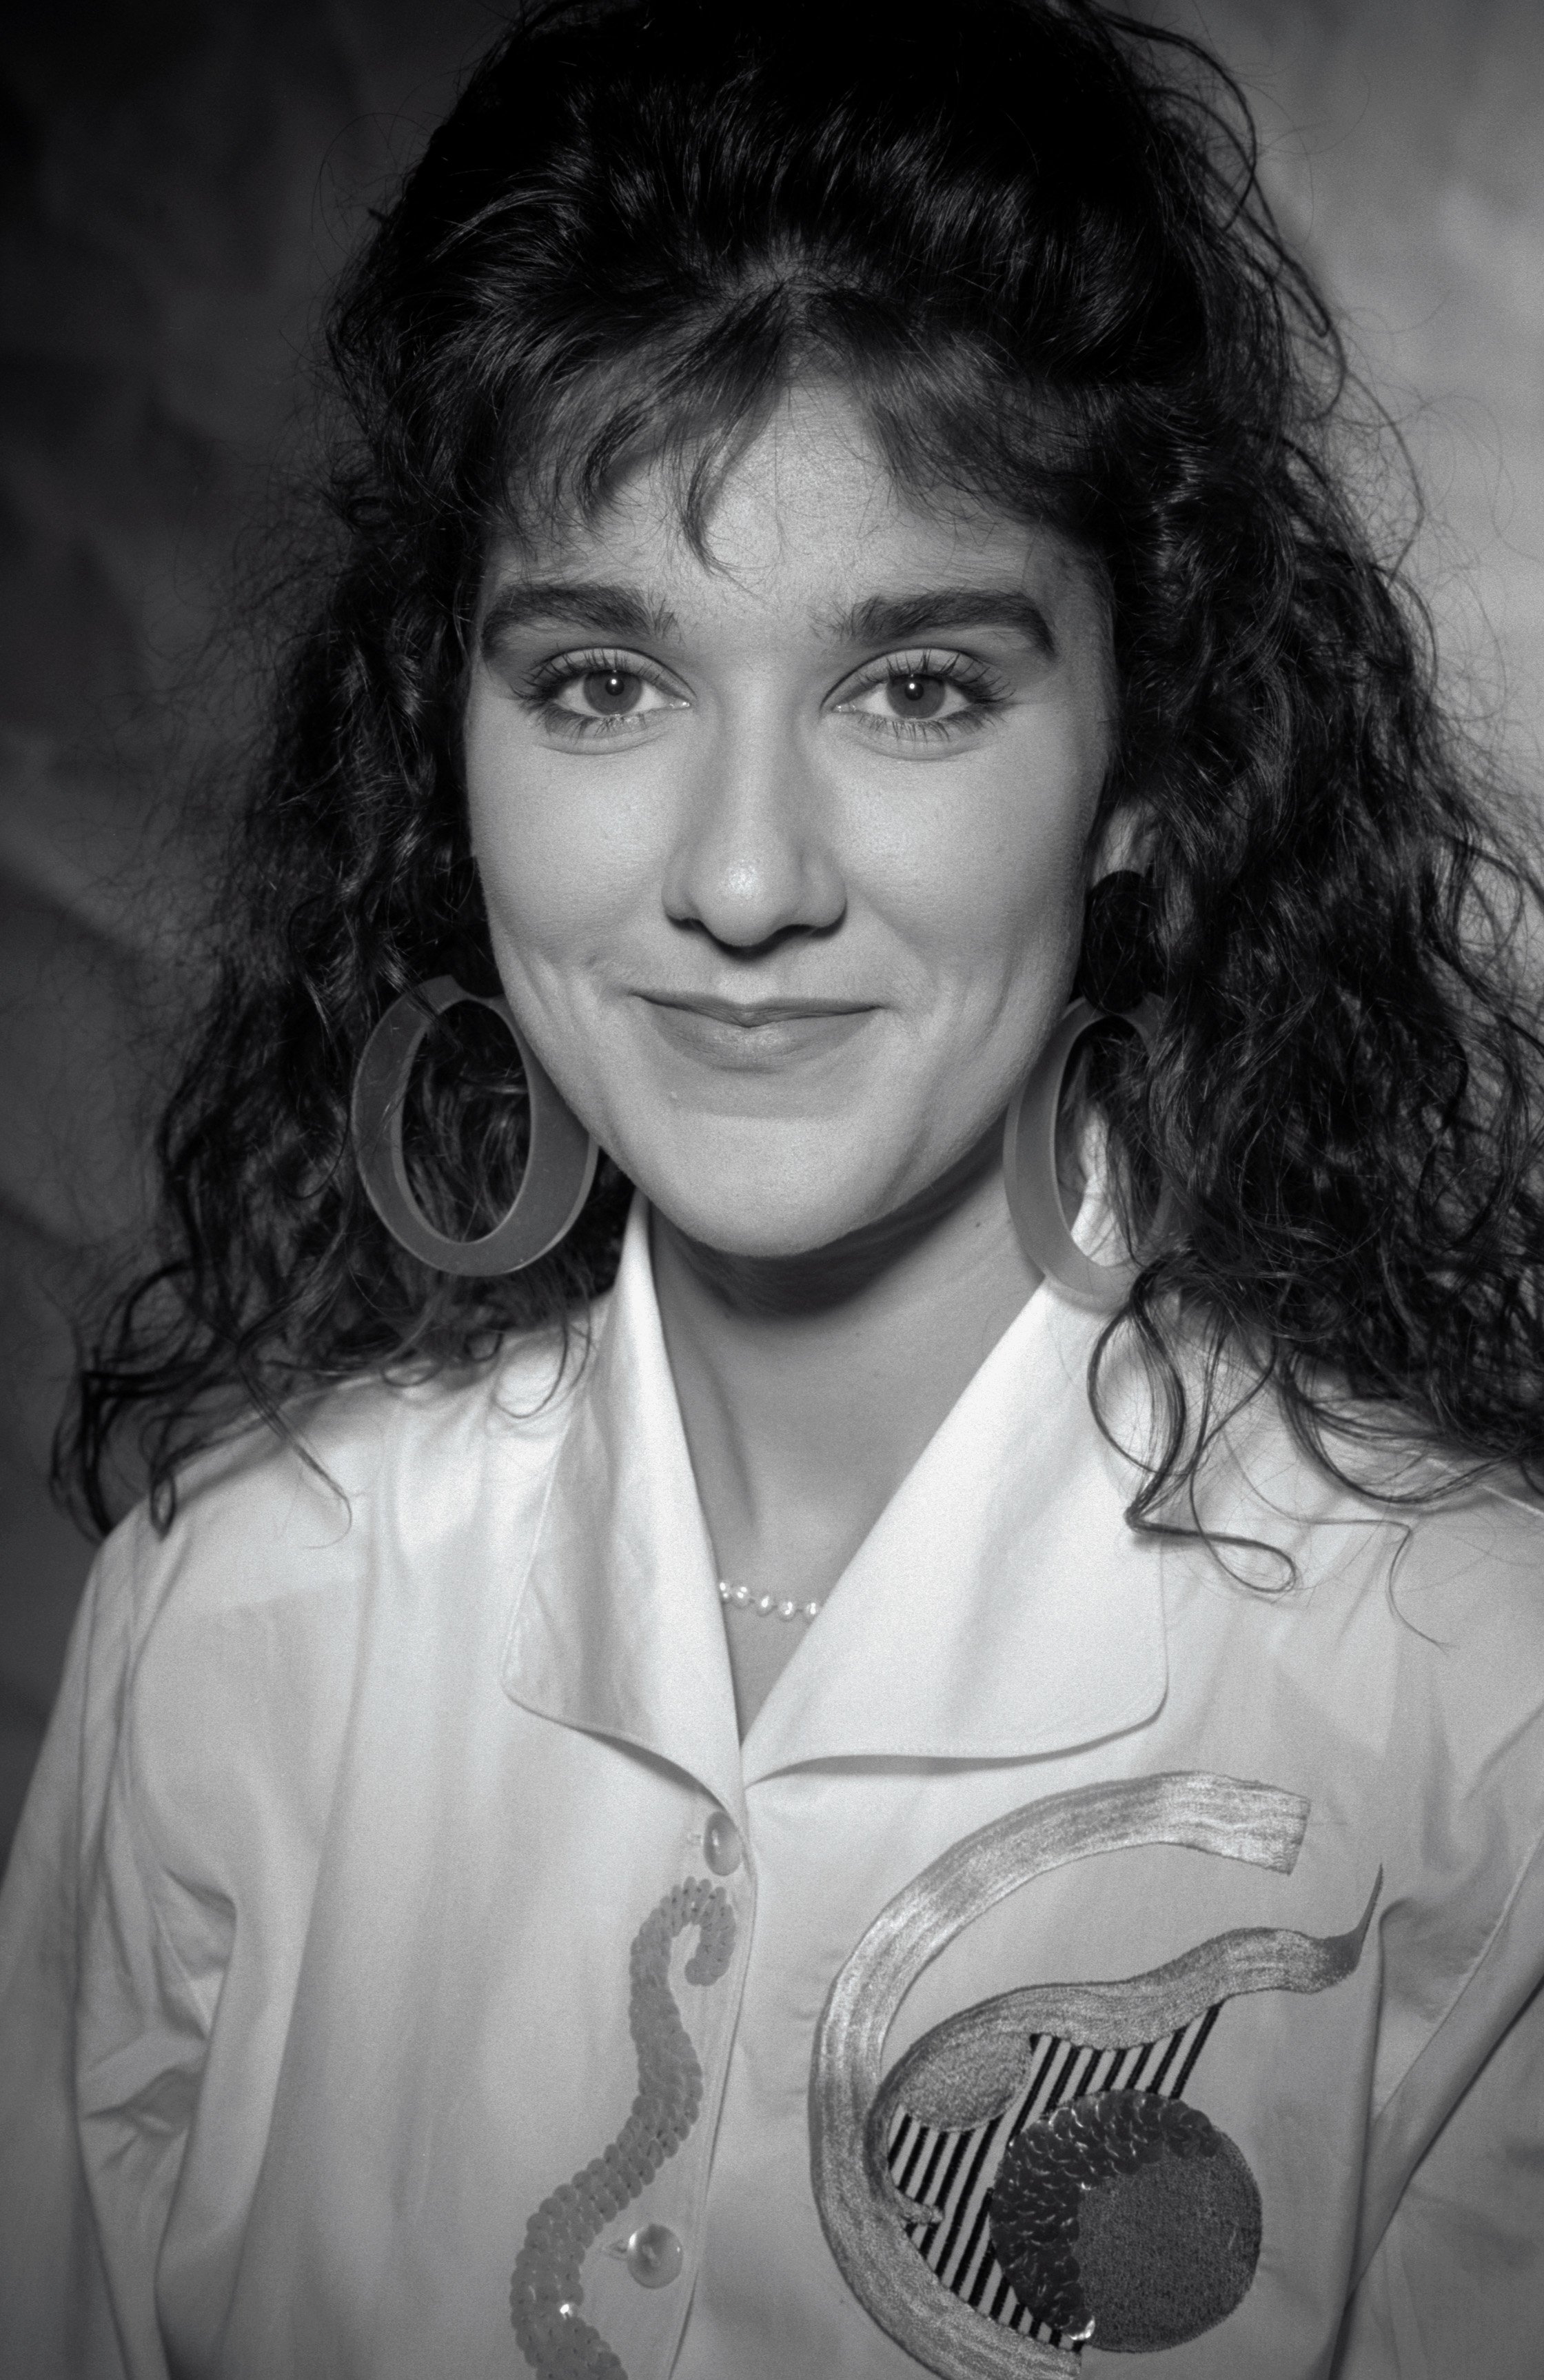 Canadian singer Celine Dion pictured wearing a white blouse with hoop earrings in 1991 in London. / Source: Getty Images